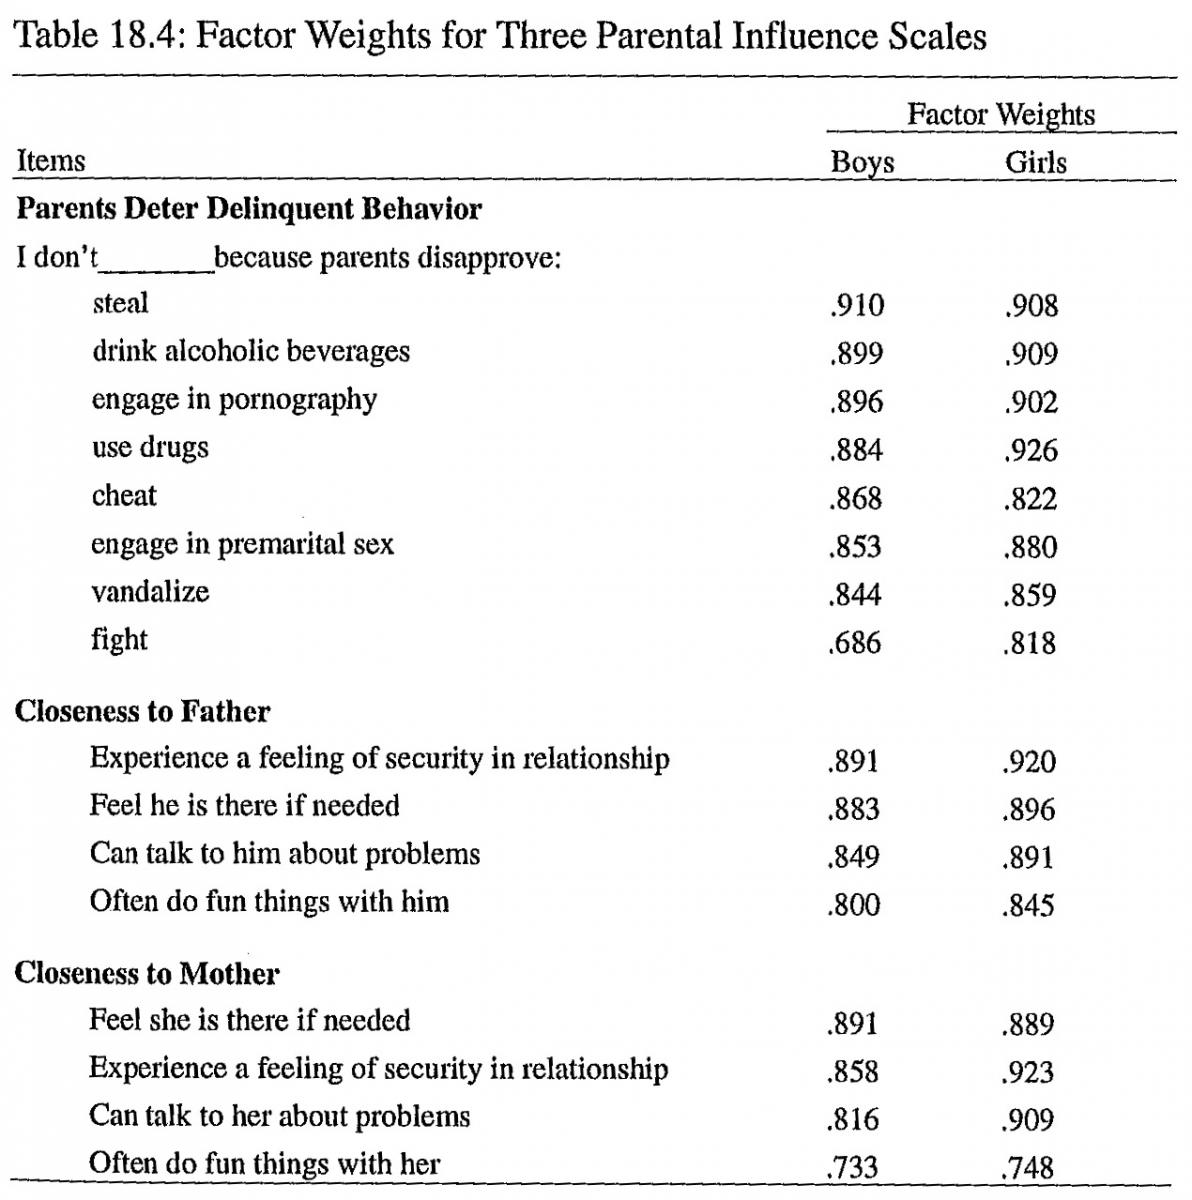 Factor weights for three parental influece scales